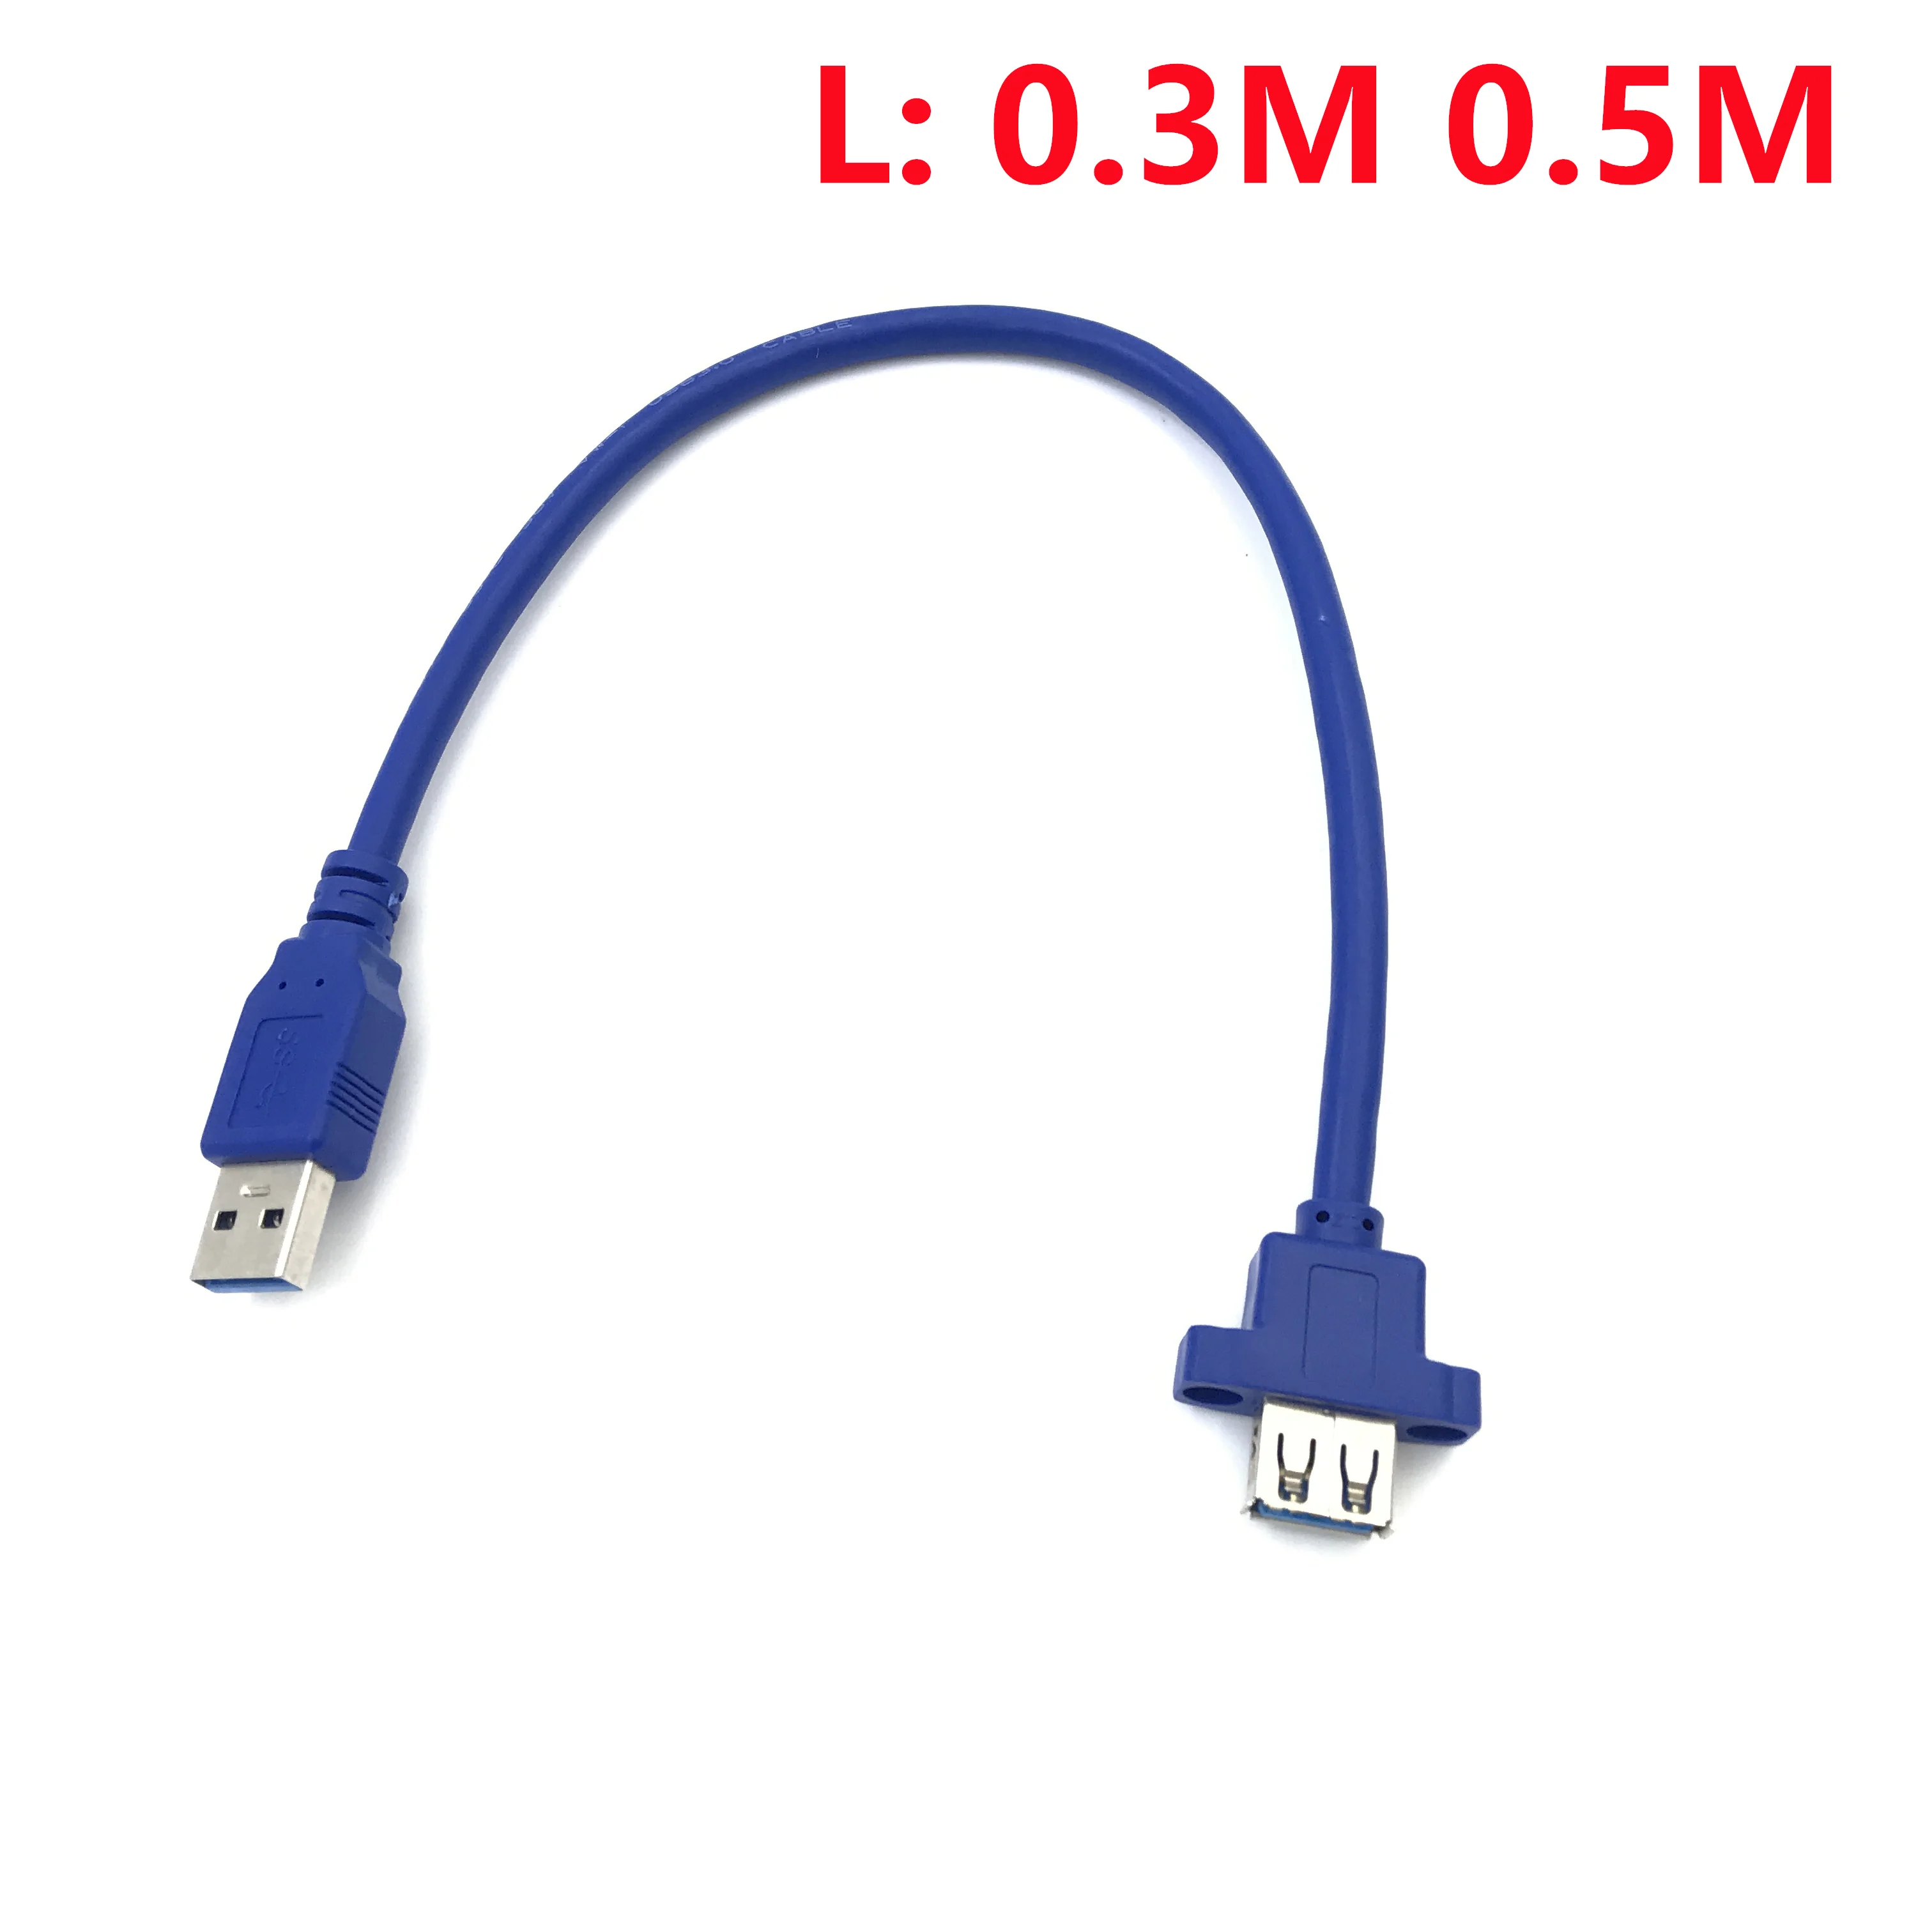 

USB Cable 3.0 Extension Male to Female extender cable cord Dual Shielded Screw Panel Mount 0.3M 0.6M 1M 1.5M 3M